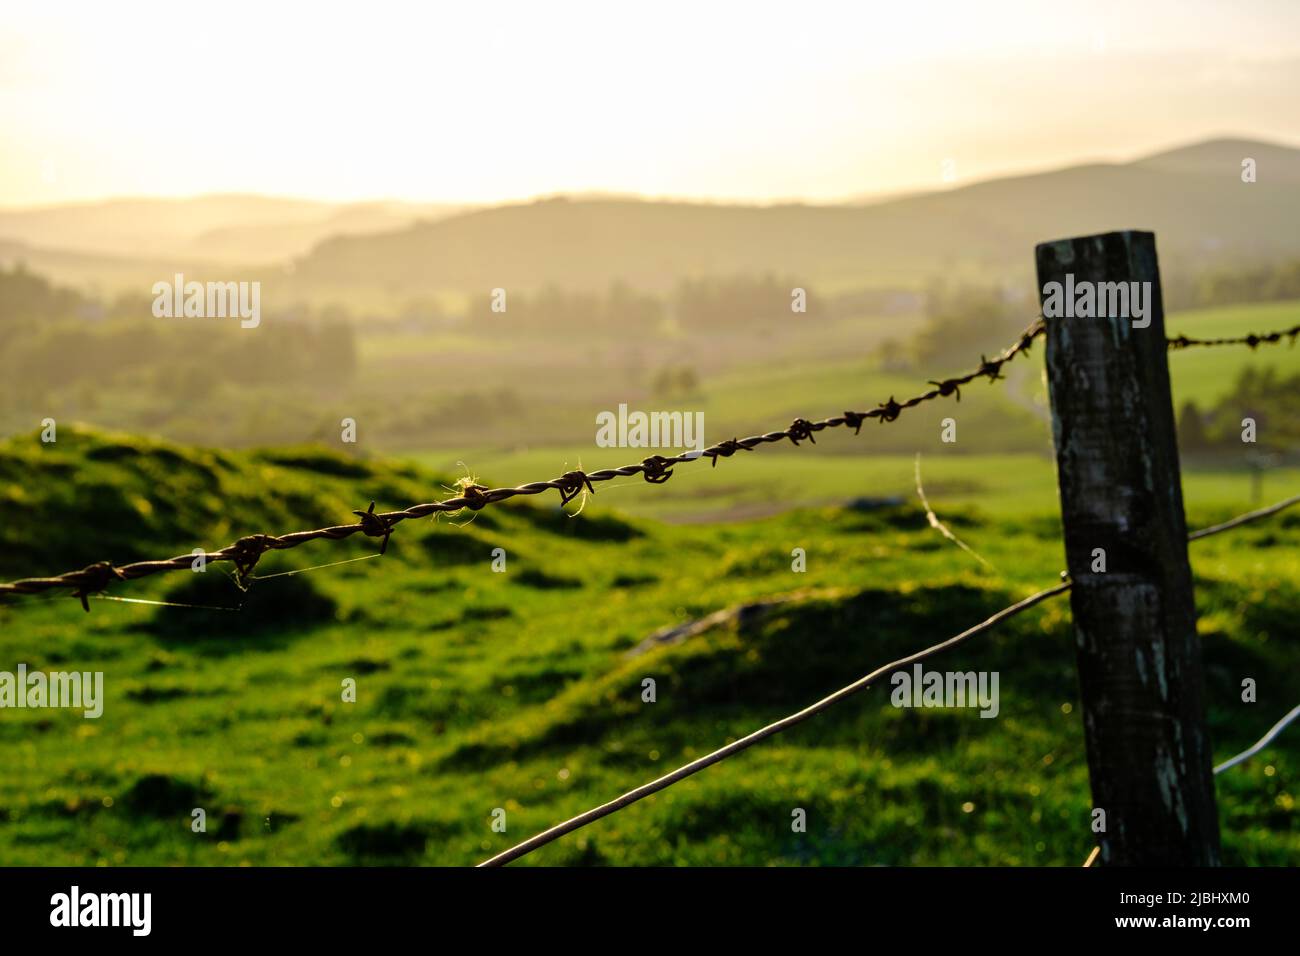 Beautiful Rolling Landscape Of The Scottish Borders At Sunset, With Focus On An Old Barbed Wire Fence In The Foreground Stock Photo